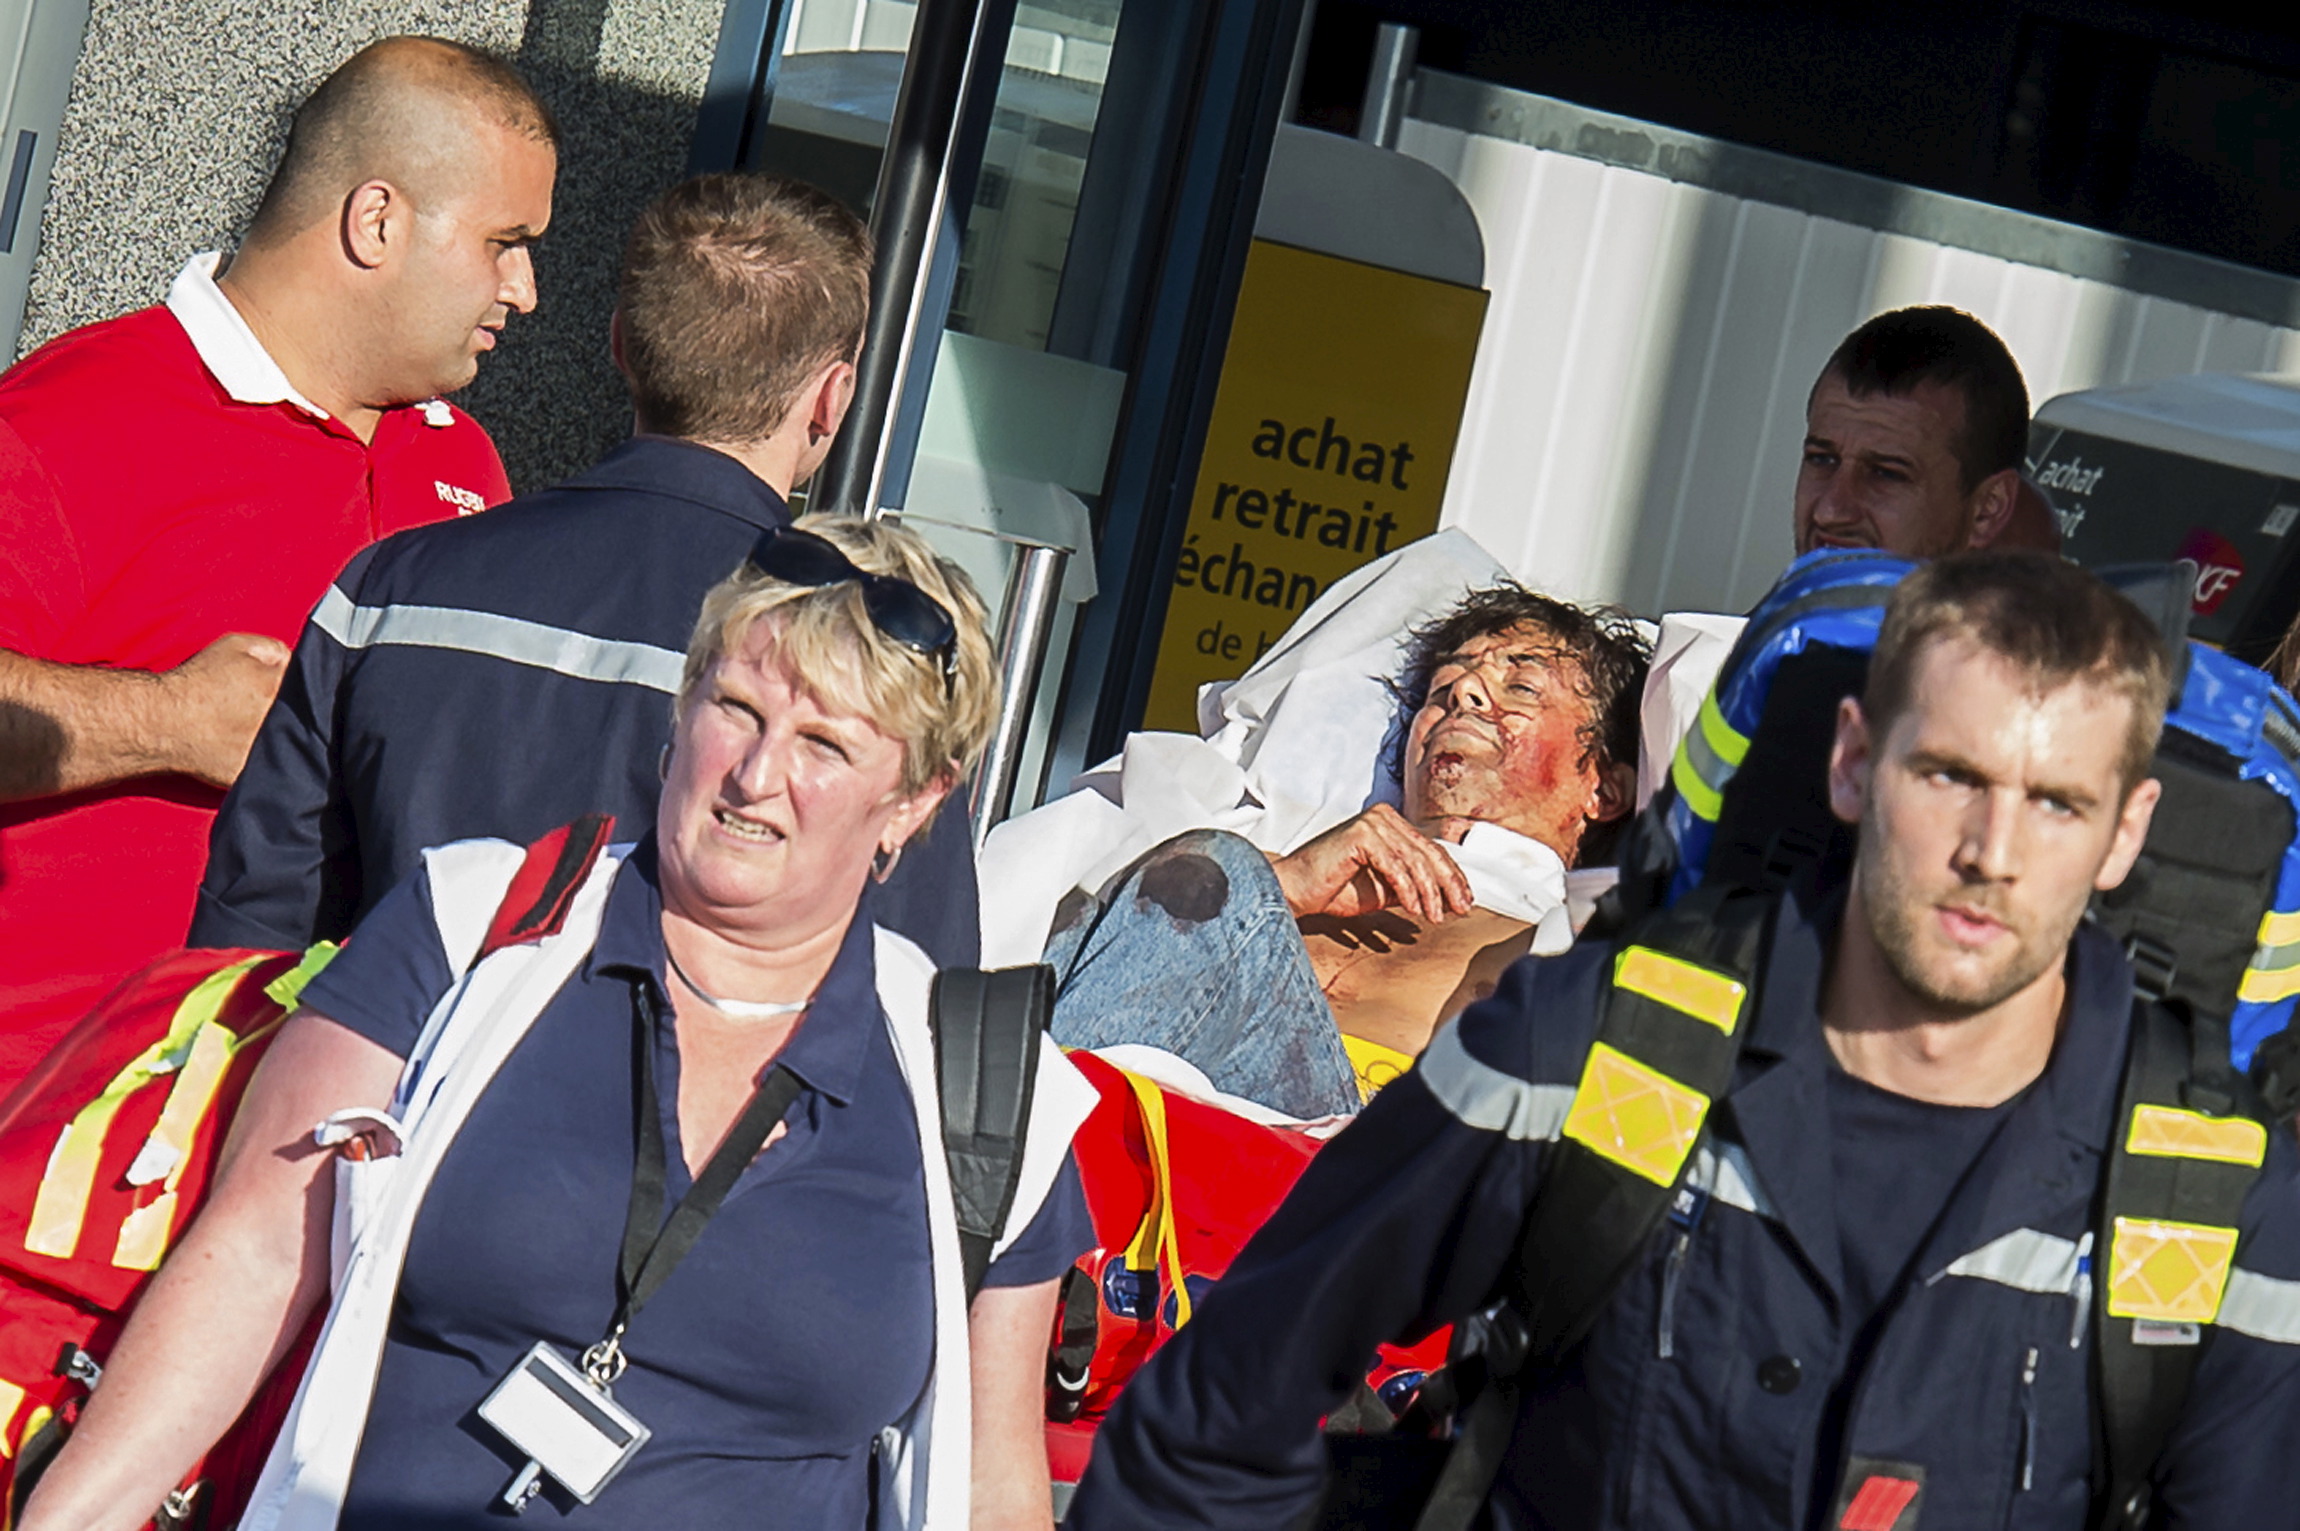 PHOTO: French emergency services transport a victim after a shooting on the Amsterdam to Paris Thalys high-speed train in Arras, France, Aug. 21, 2015. 